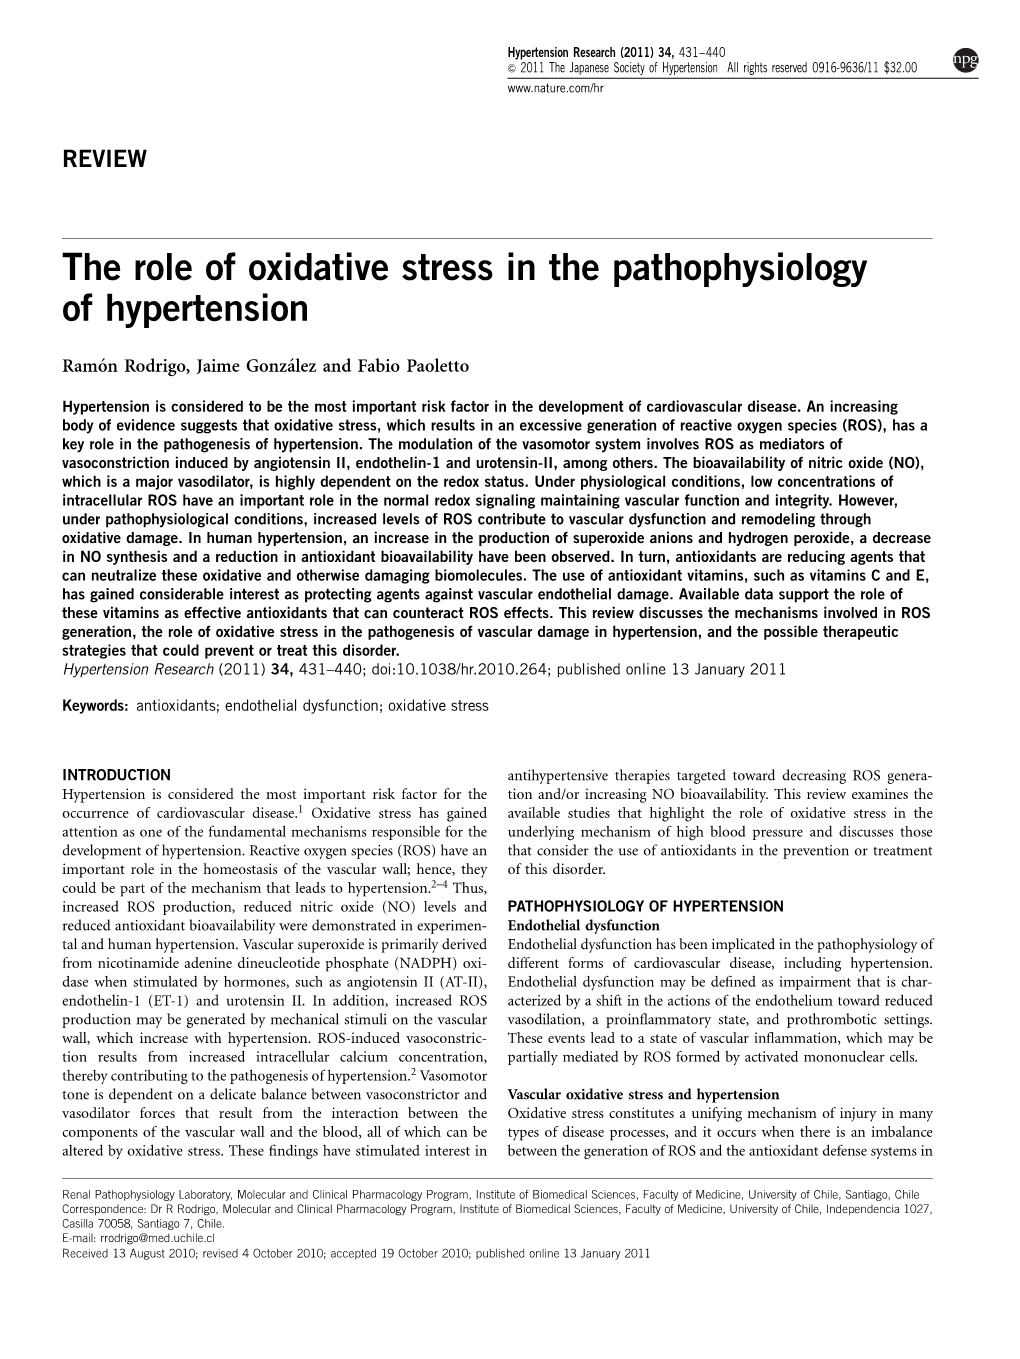 The Role of Oxidative Stress in the Pathophysiology of Hypertension